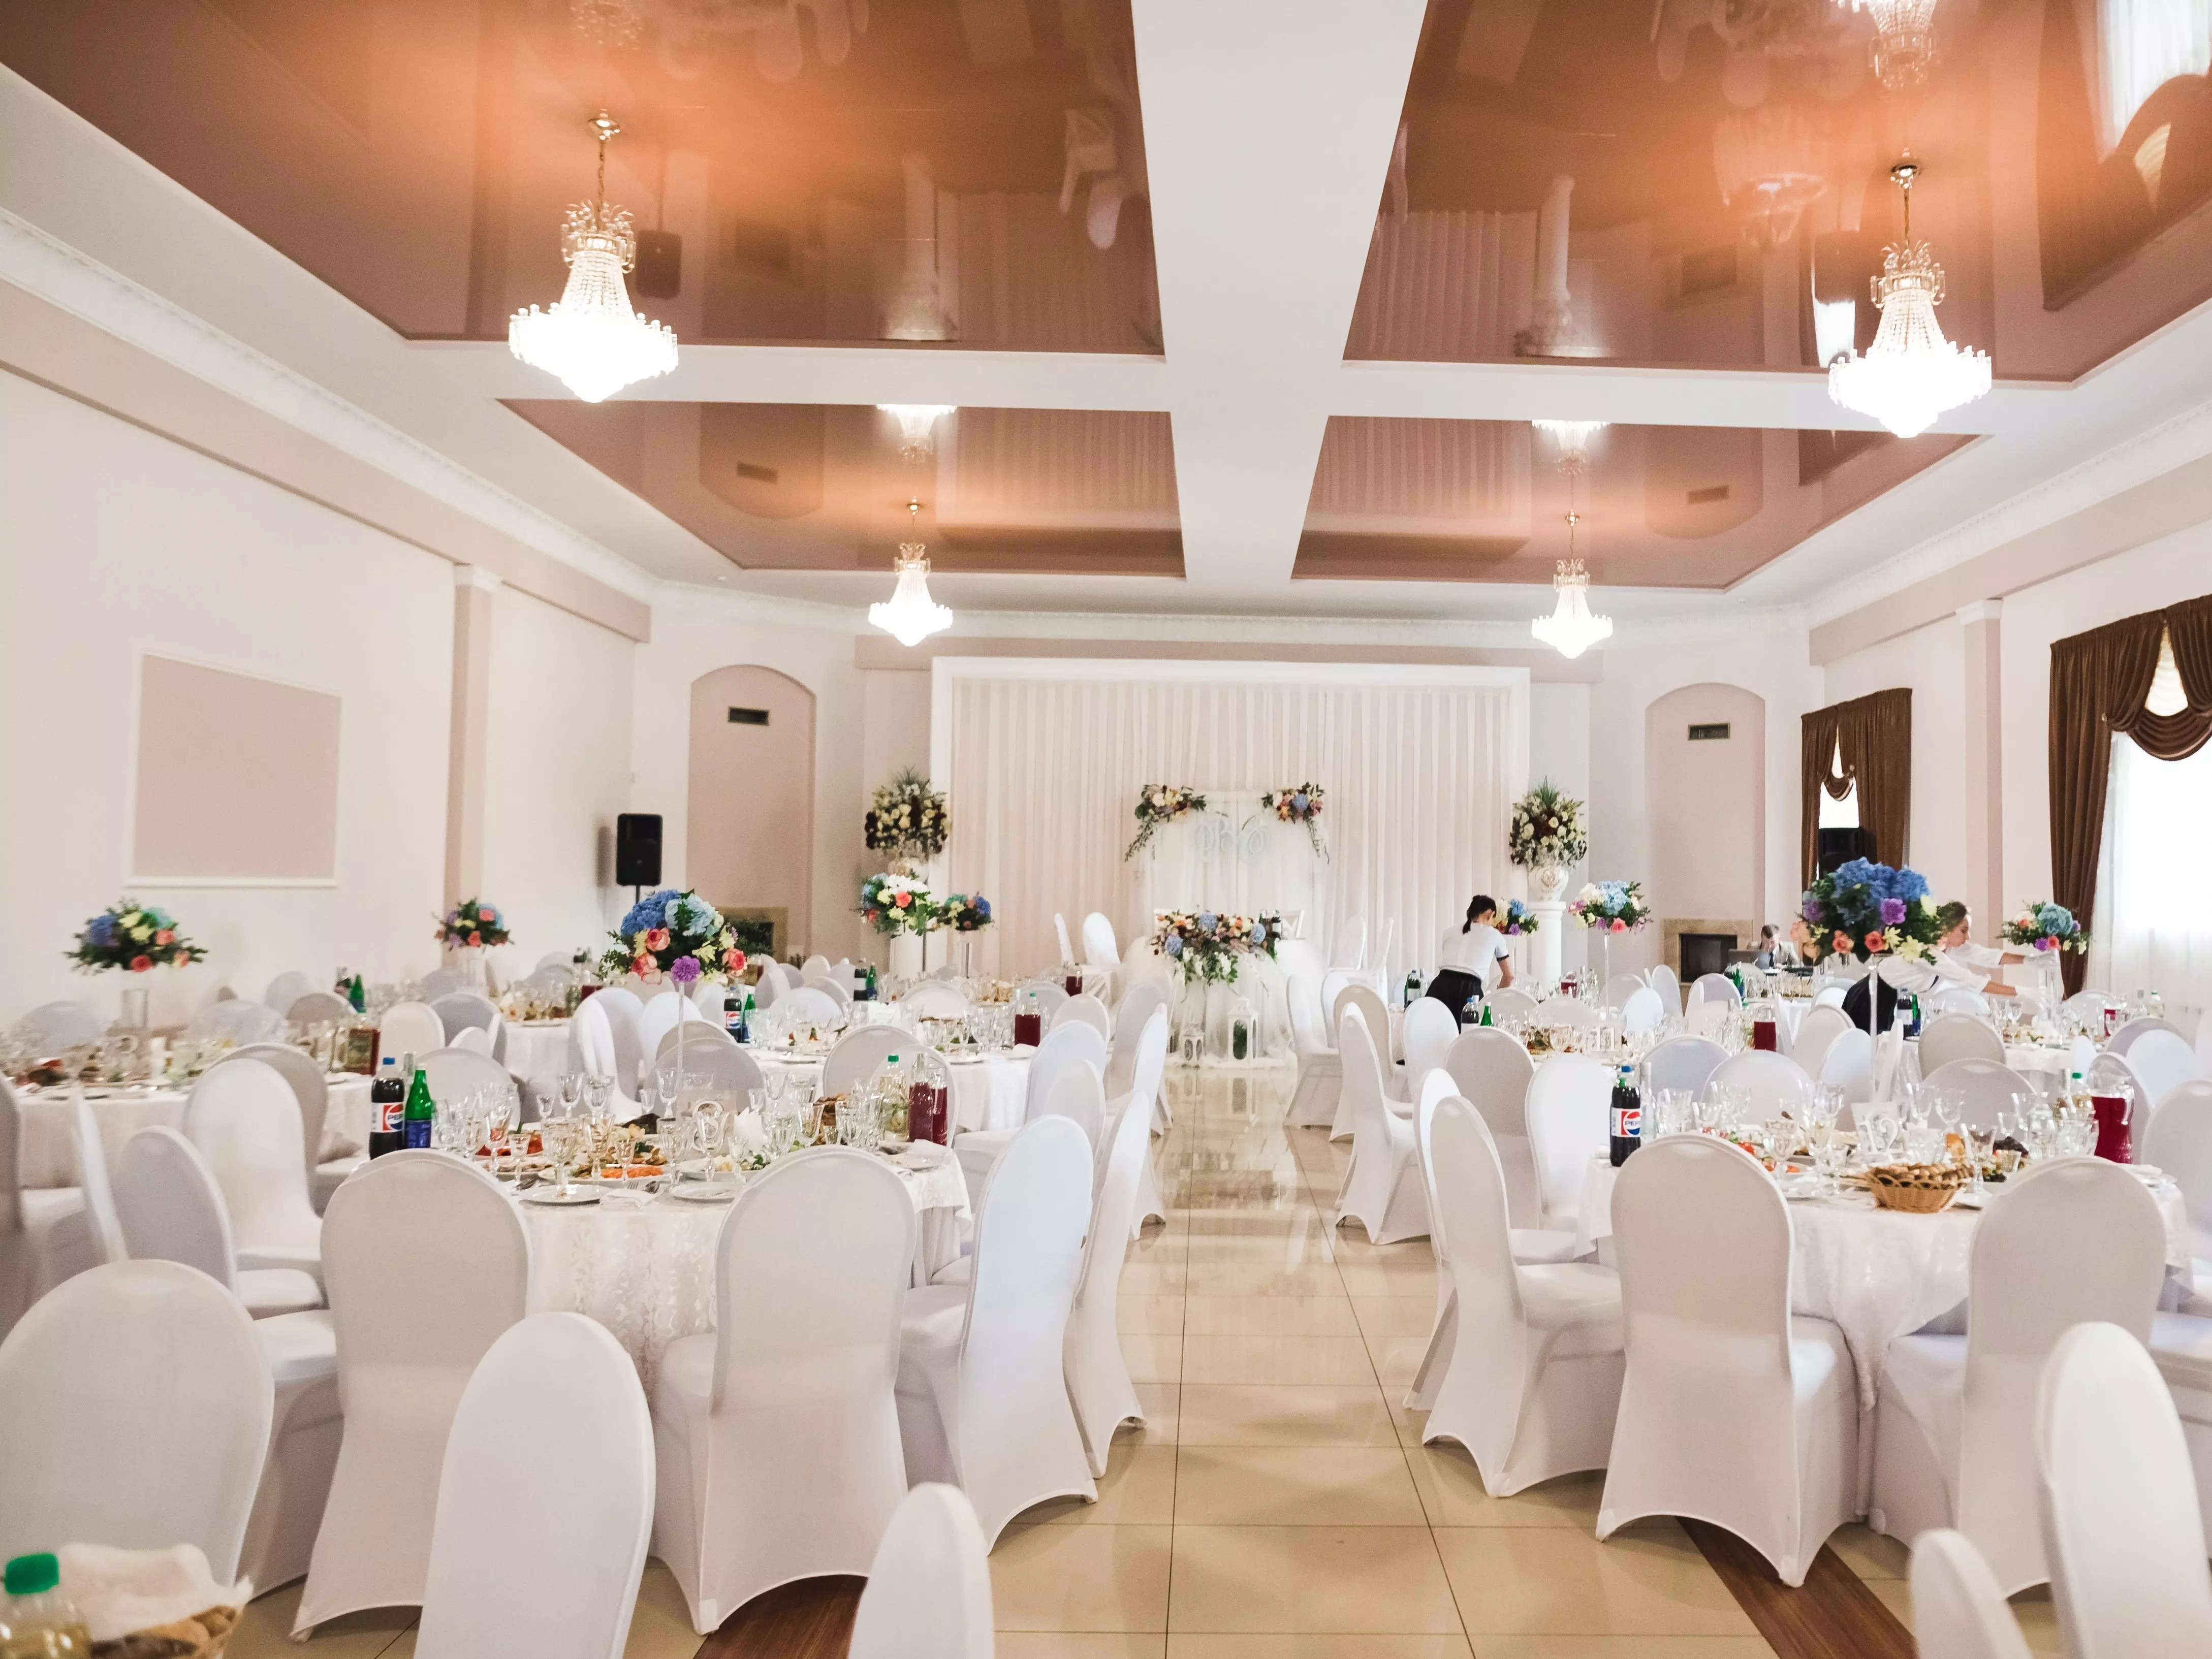 a wedding venue banquet hall with white chairs and tables set up